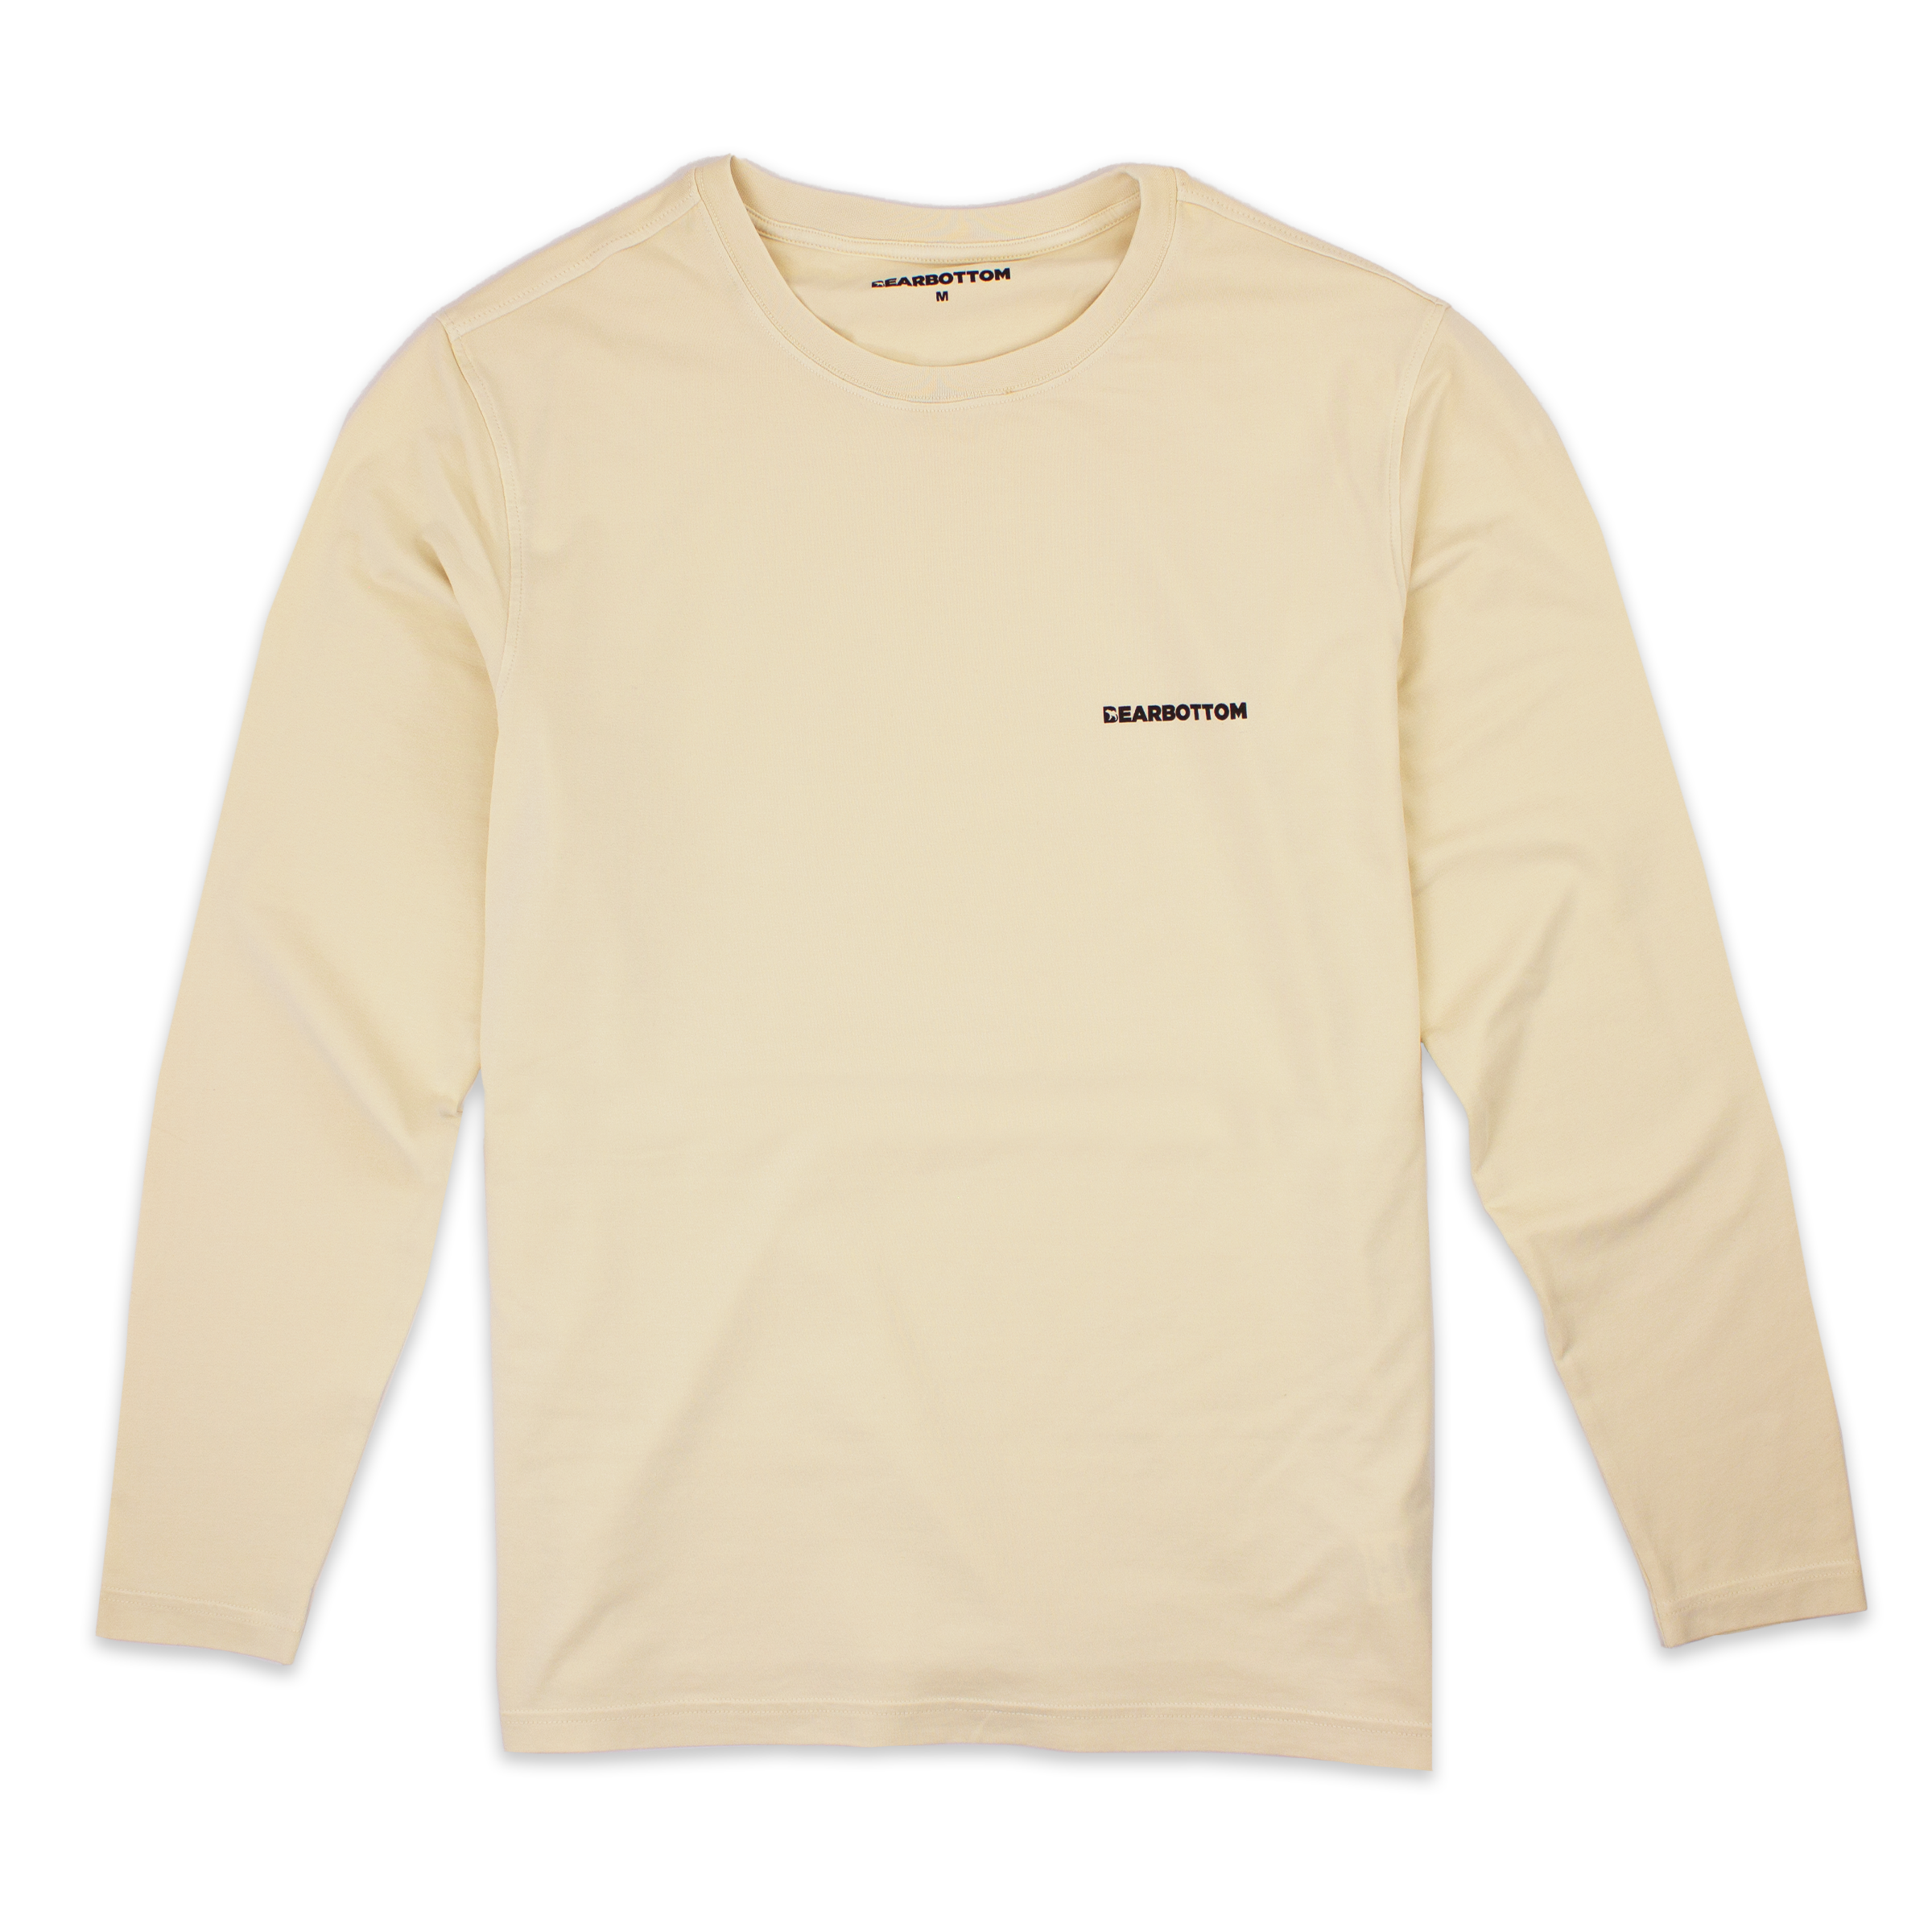 Natural Dye Logo Long Sleeve Tee in Sand yellow with Crewneck and Bearbottom printed in black on front left chest